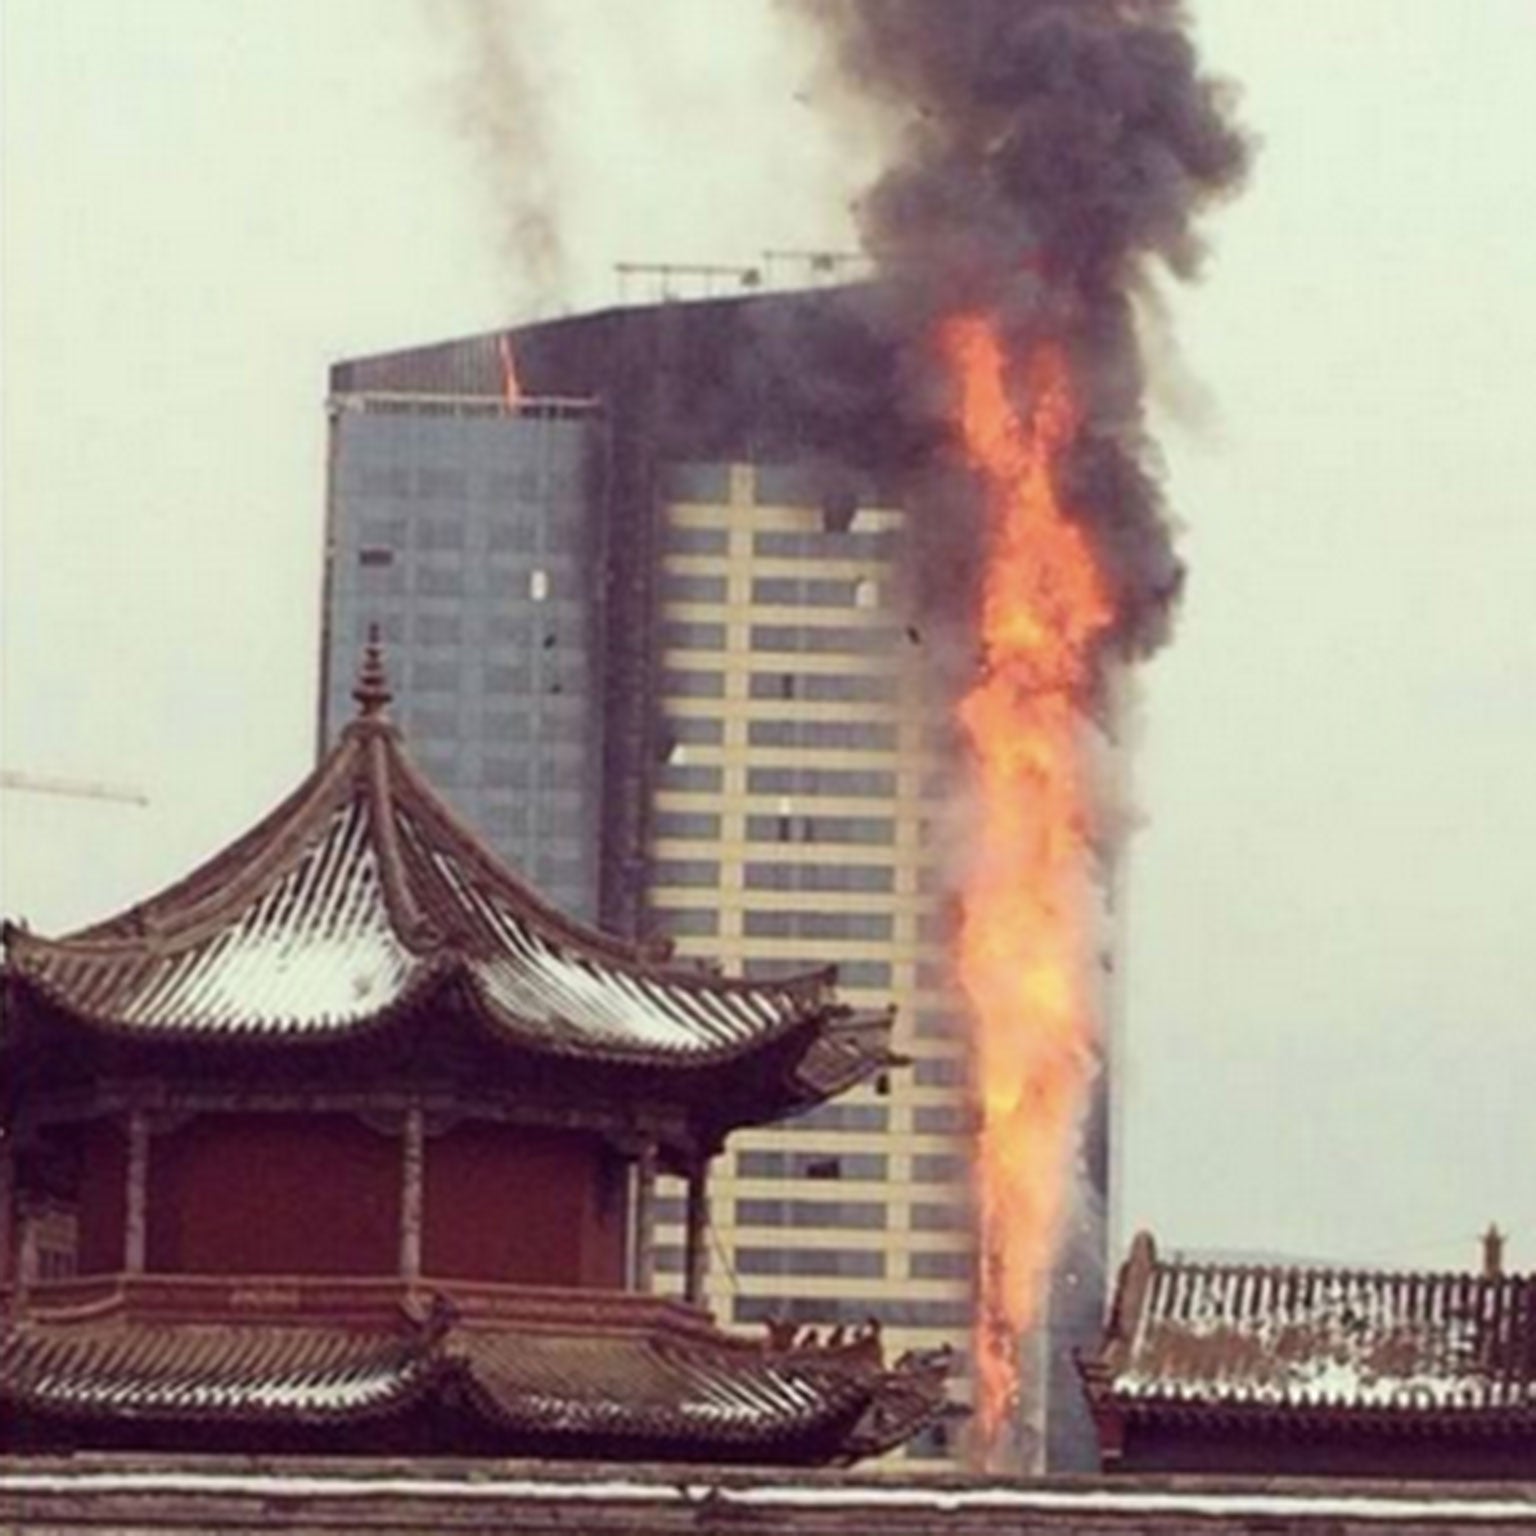 A fire broke out at the high rise Shangri-la Hotel in Mongolia, with smoke and flames visible throughout the afternoon (Pic: A.Anar)